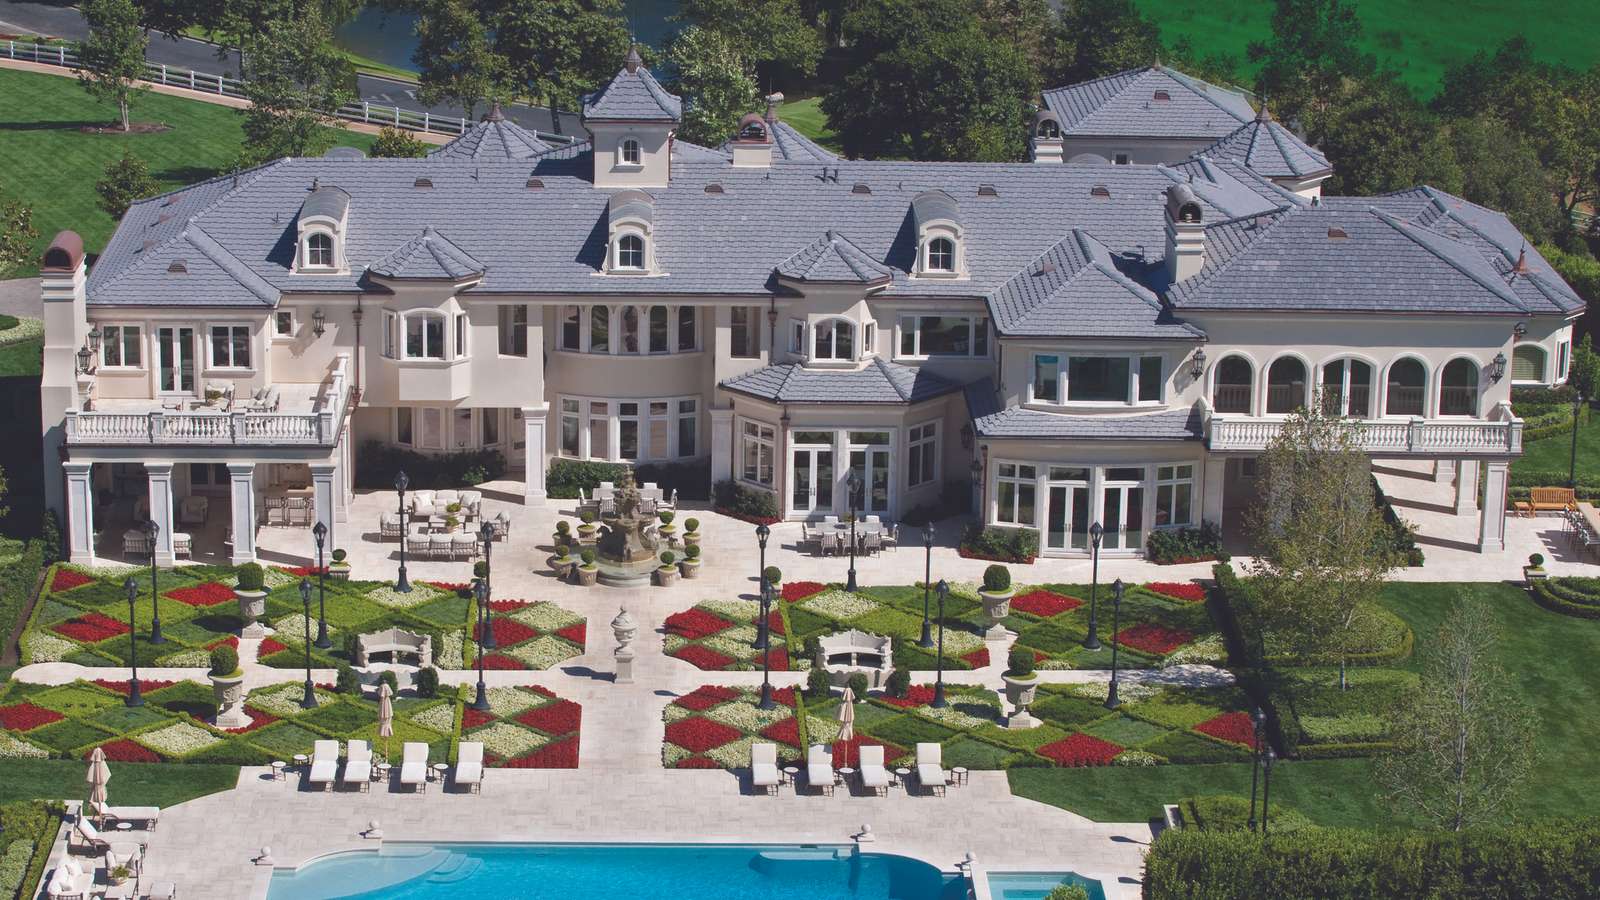 Mansion With Pool puzzle online from photo